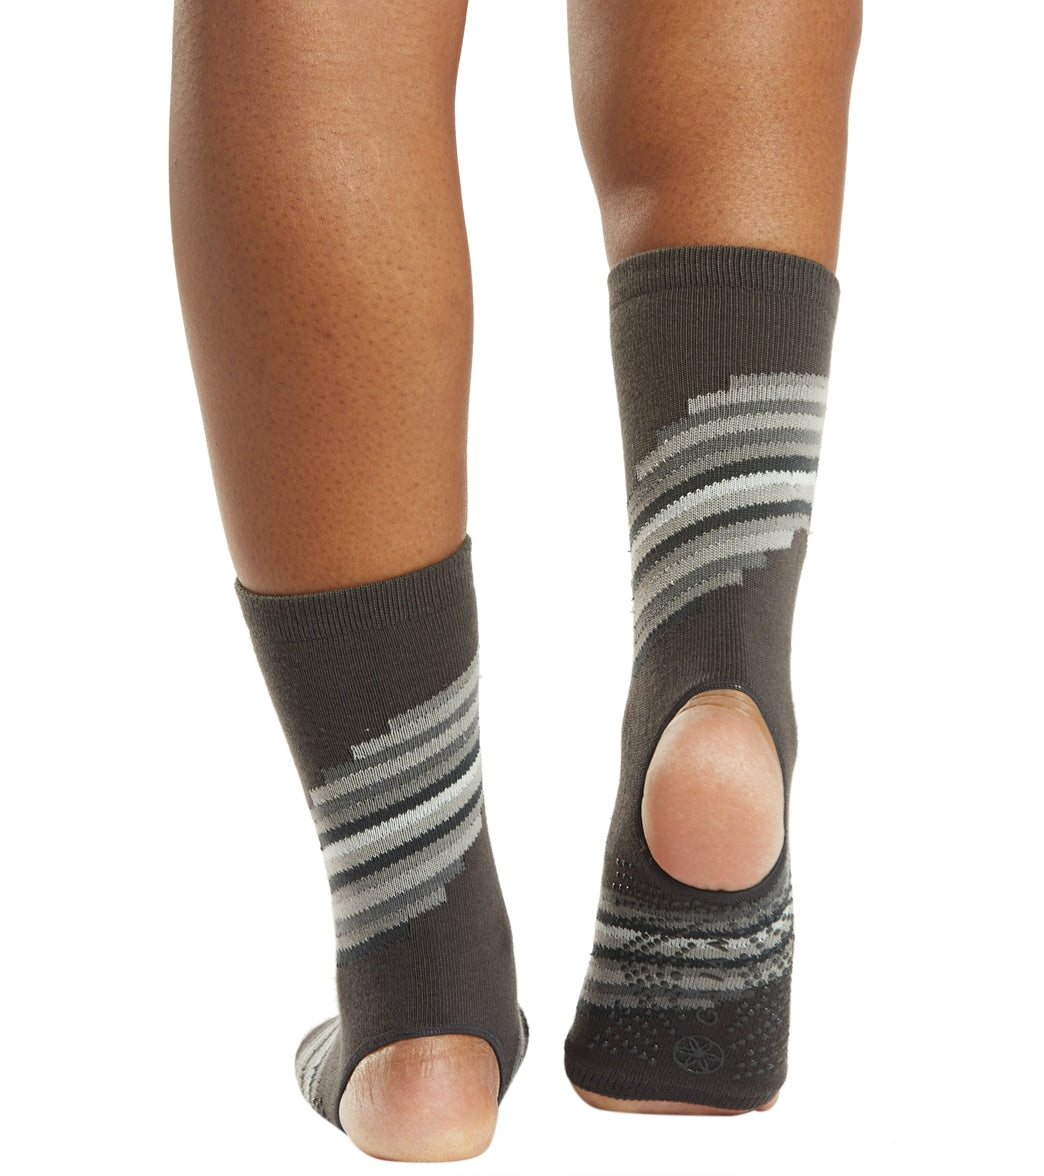 2 Gaiam Grippy Yoga Socks Toeless One Size Fits Most Grey With